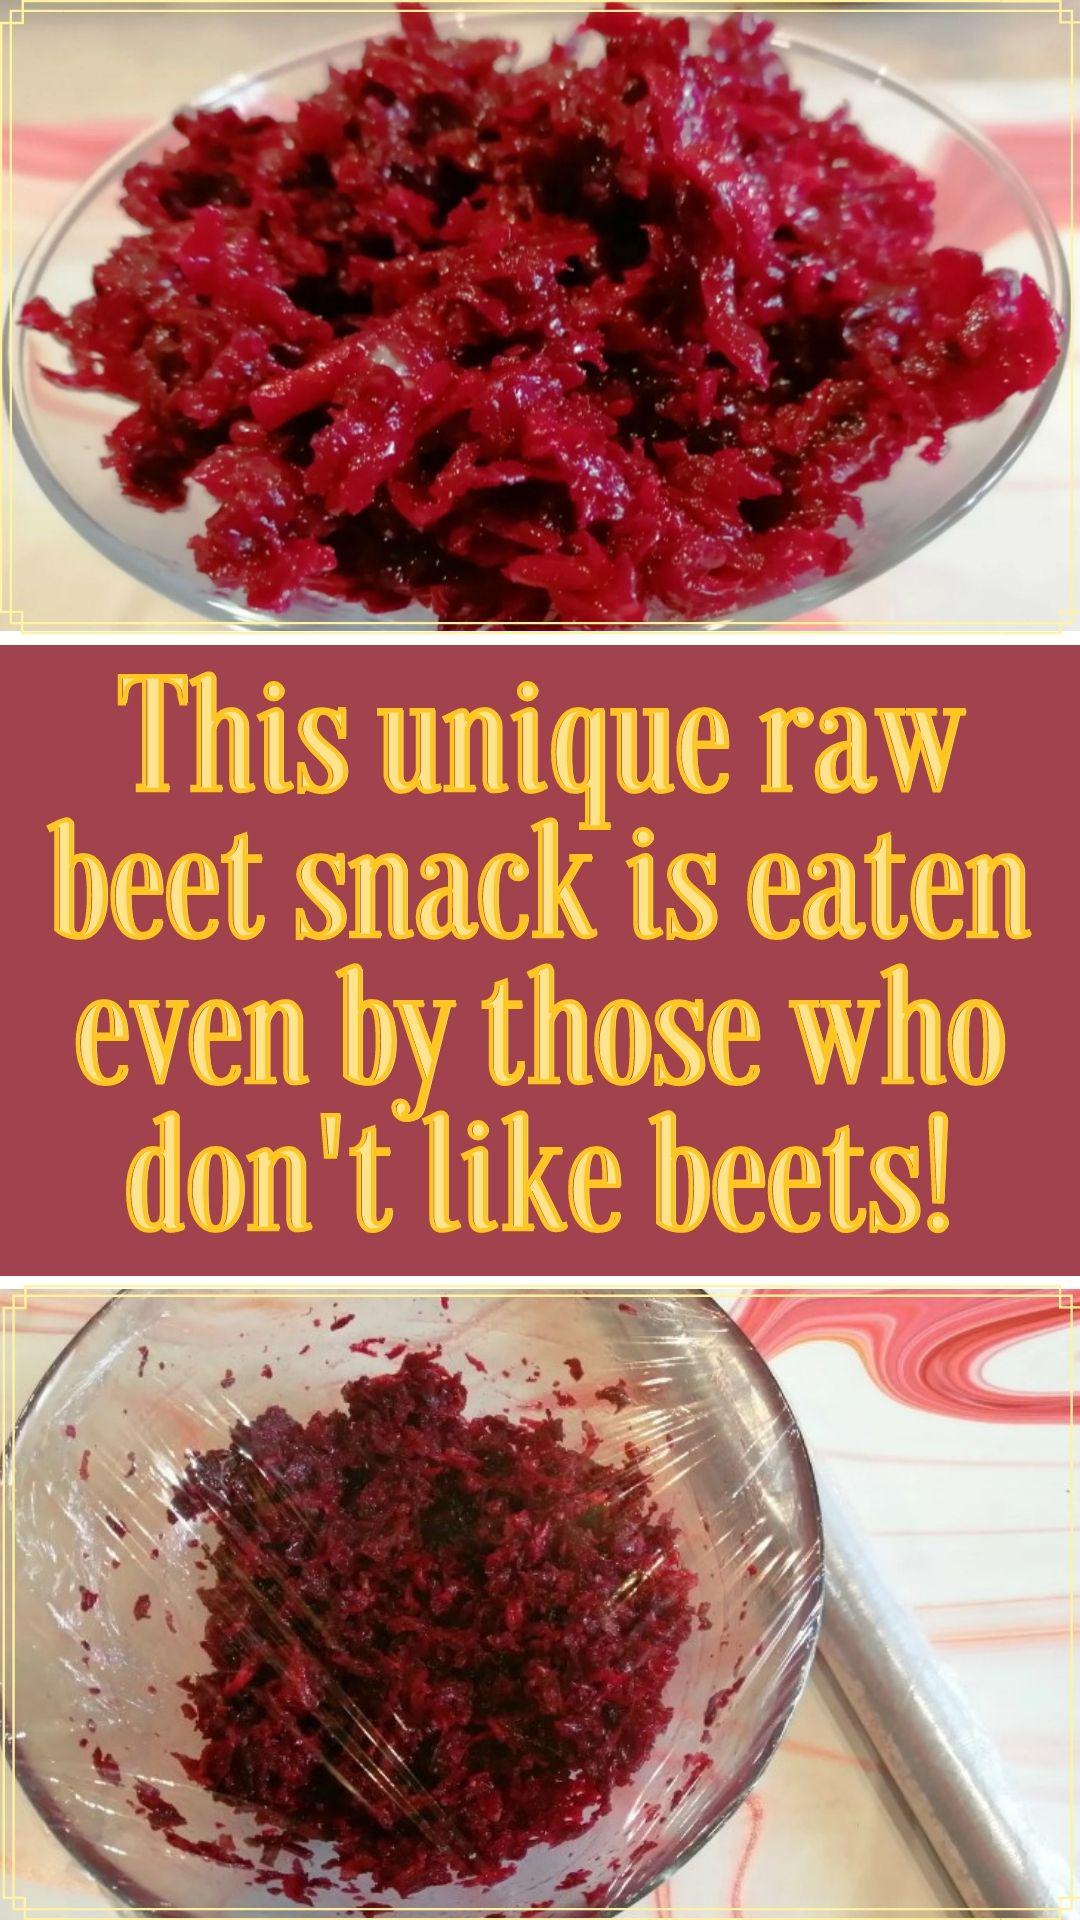 This unique raw beet snack is eaten even by those who don't like beets!